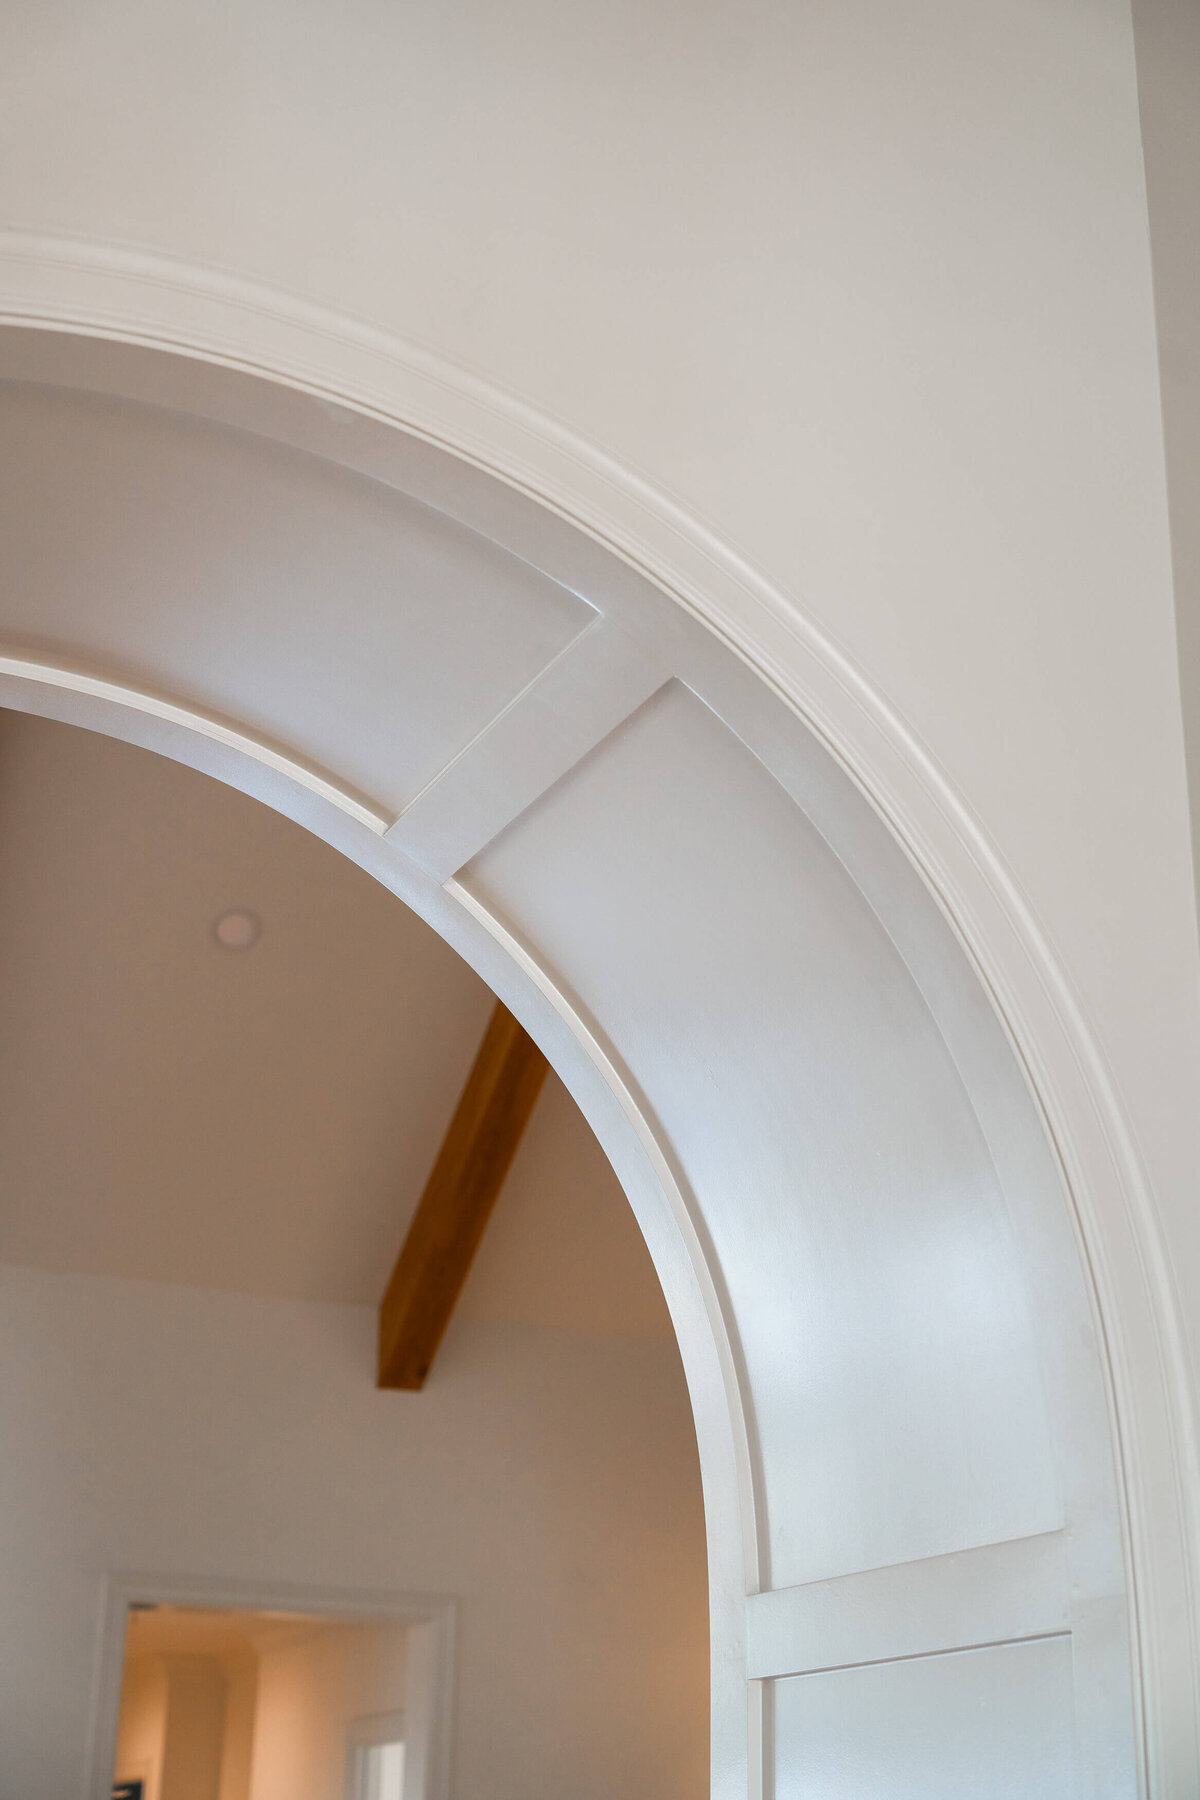 Arched trim work details in Colleyville custom home